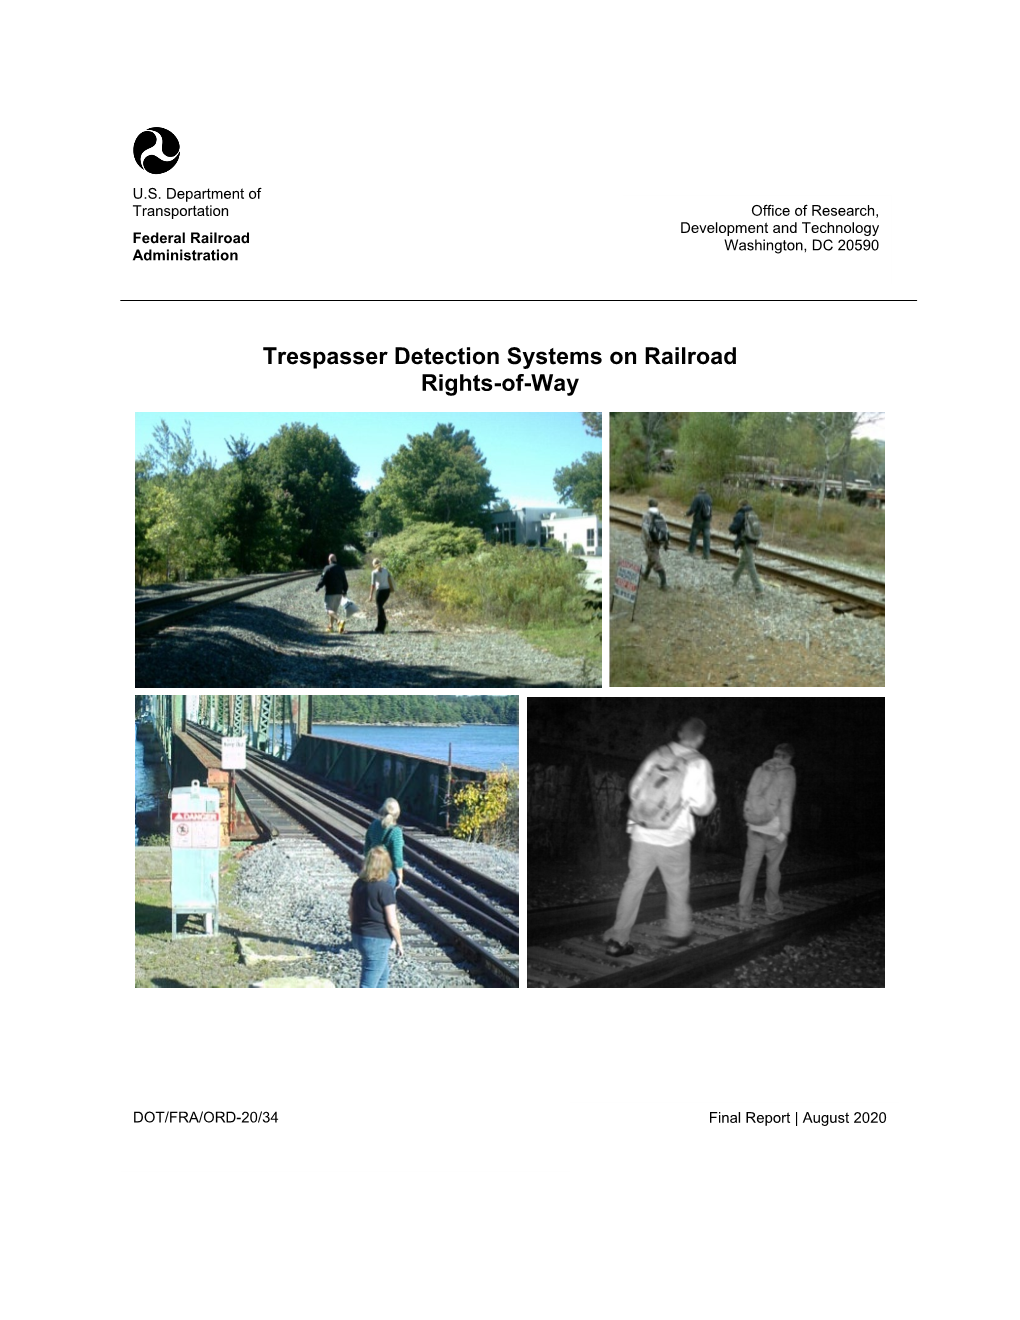 Trespasser Detection Systems on Railroad Rights-Of-Way